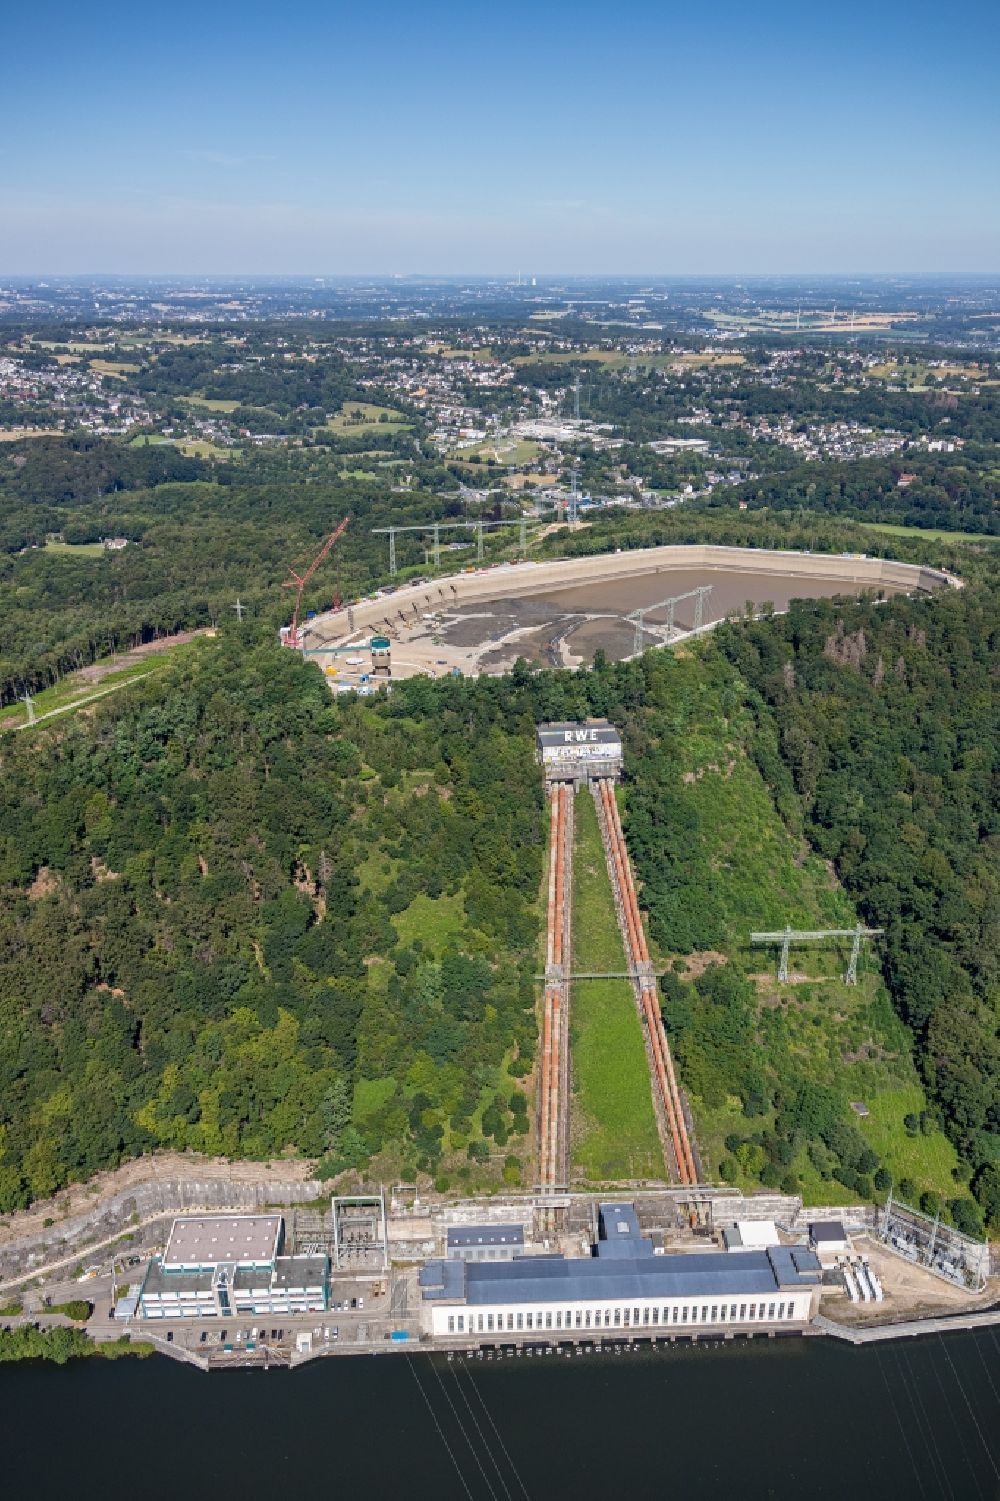 Herdecke from above - Construction site of Pumped storage power plant / hydro power plant with energy storage on Hengsteysee in Herdecke in North Rhine-Westphalia